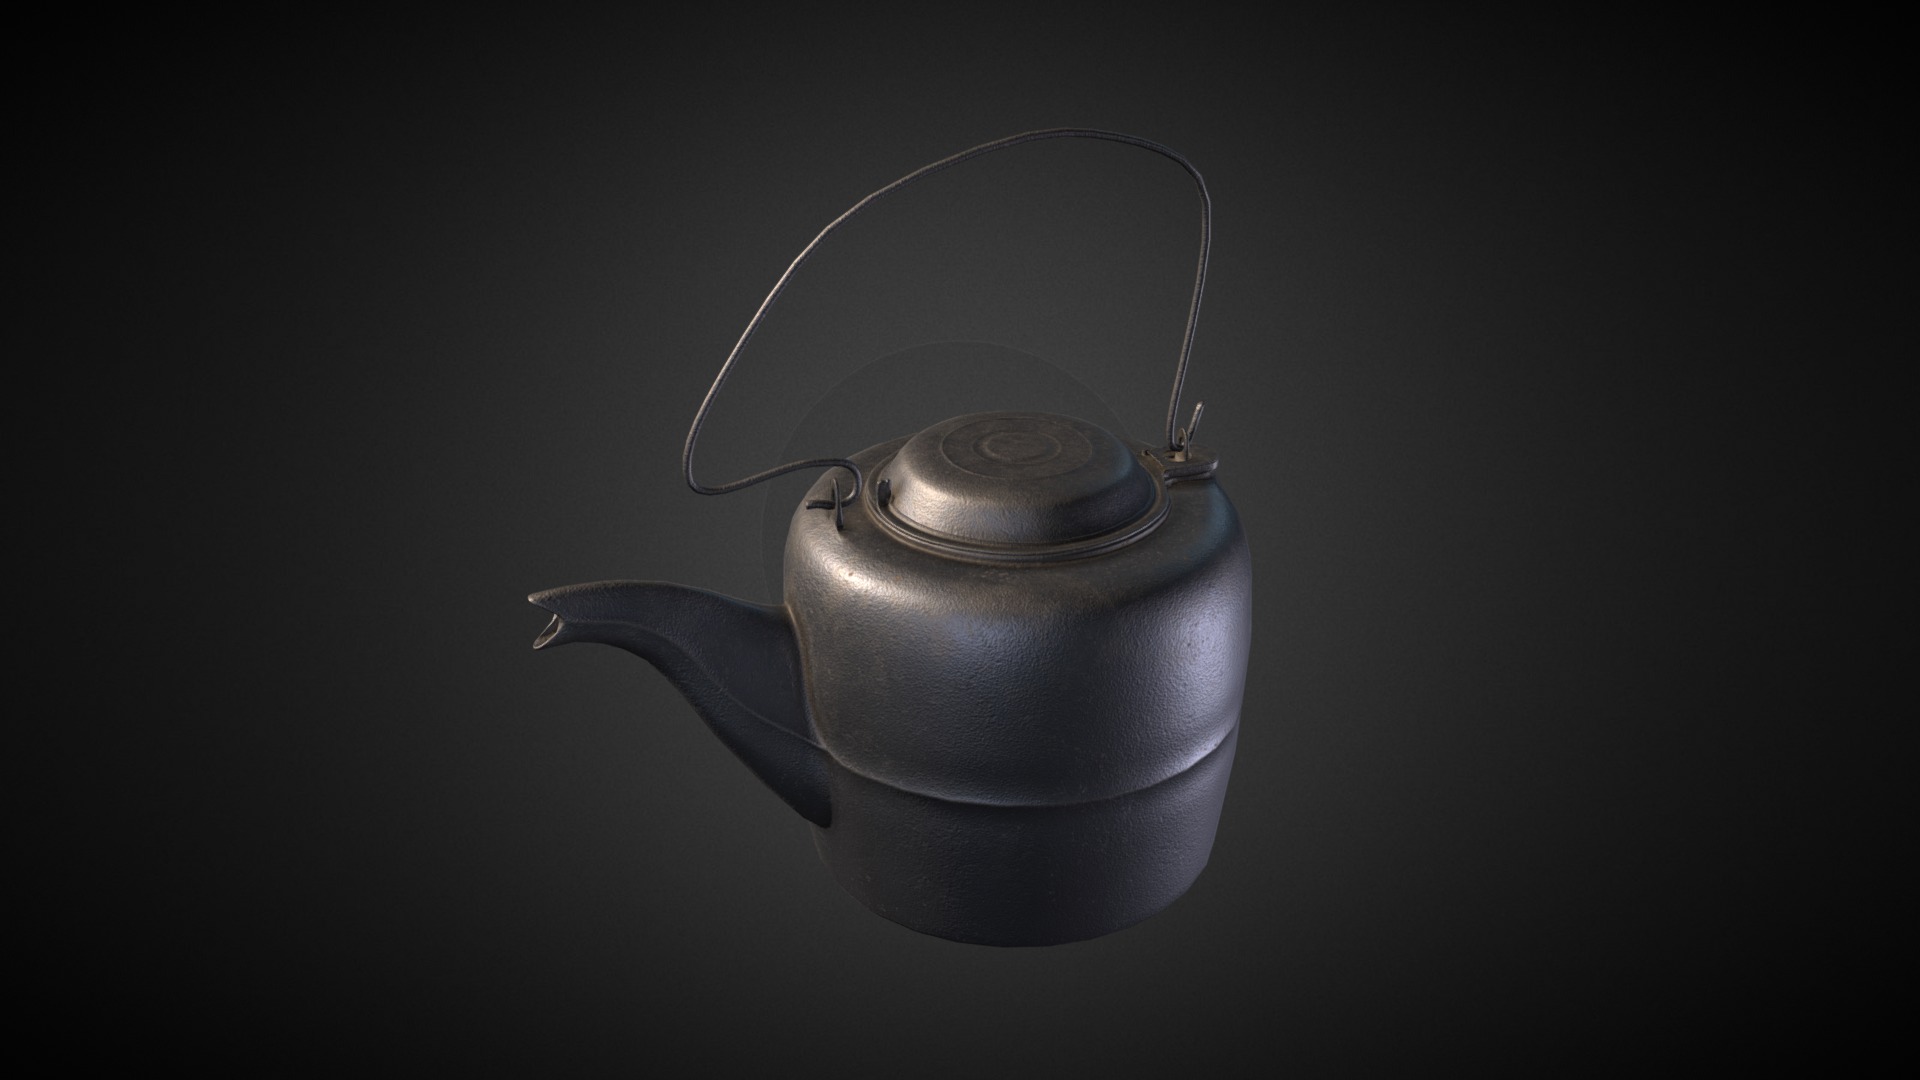 3D model Cast Iron Kettle - This is a 3D model of the Cast Iron Kettle. The 3D model is about a tea kettle on a black background.